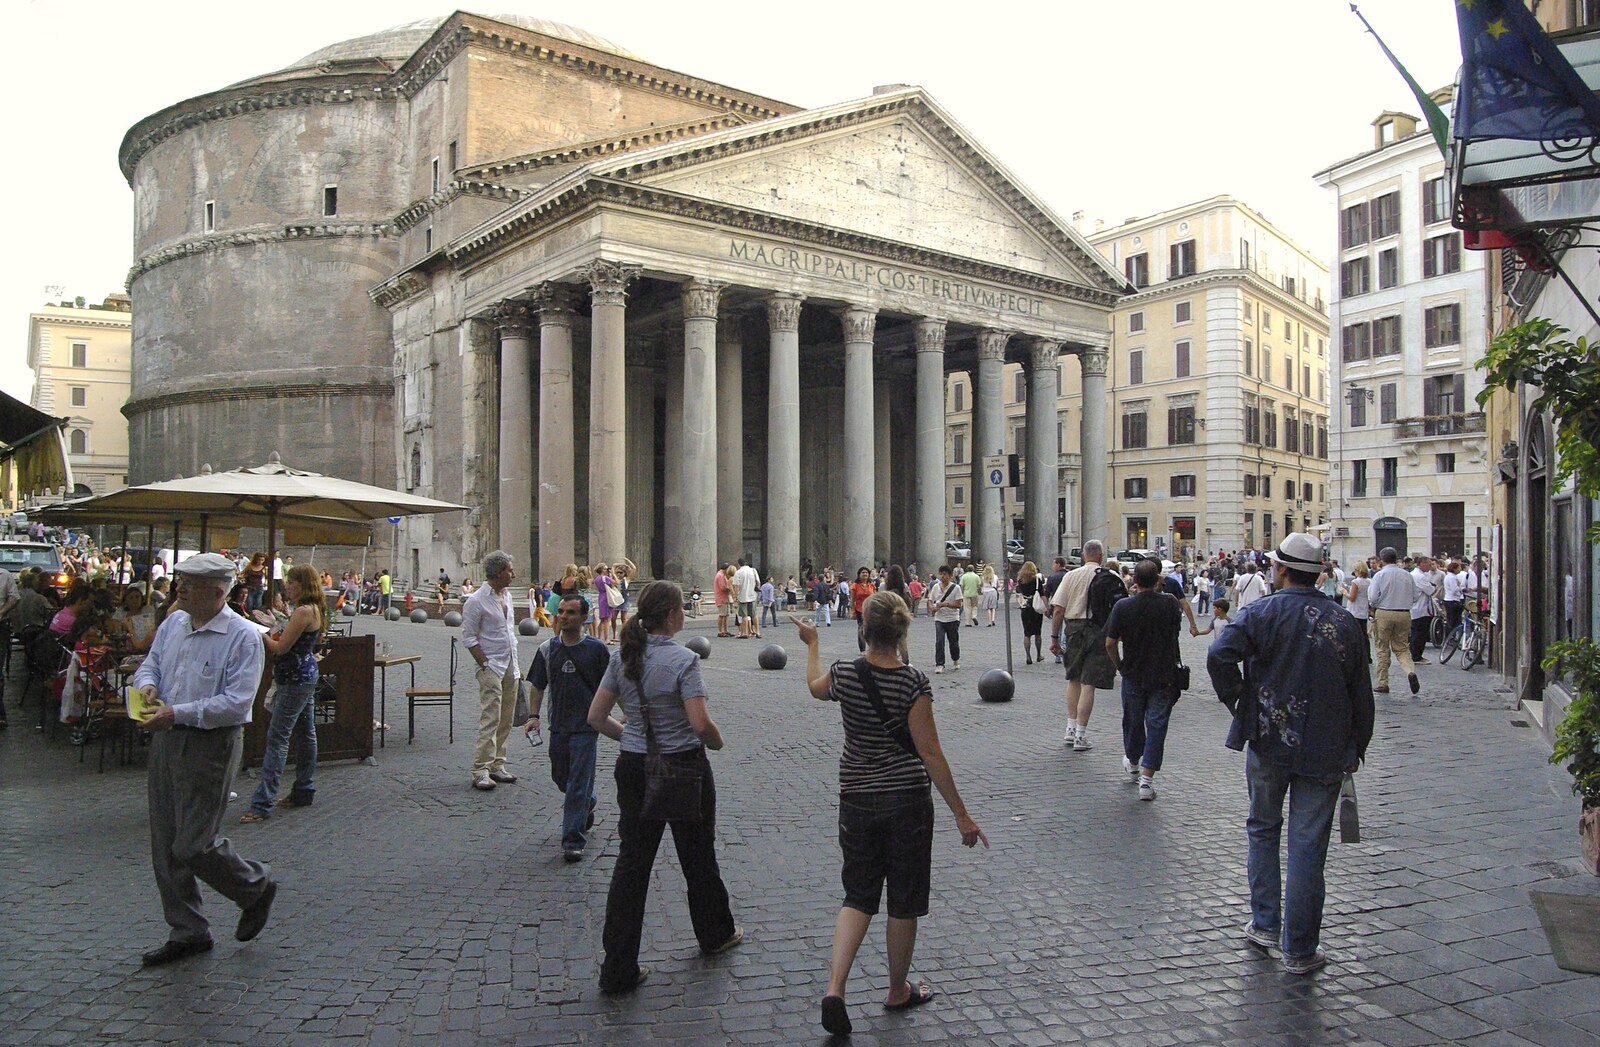 The Pantheon in the Piazza della Rotonda from A Sojourn in The Eternal City, Rome, Italy - 22nd July 2008